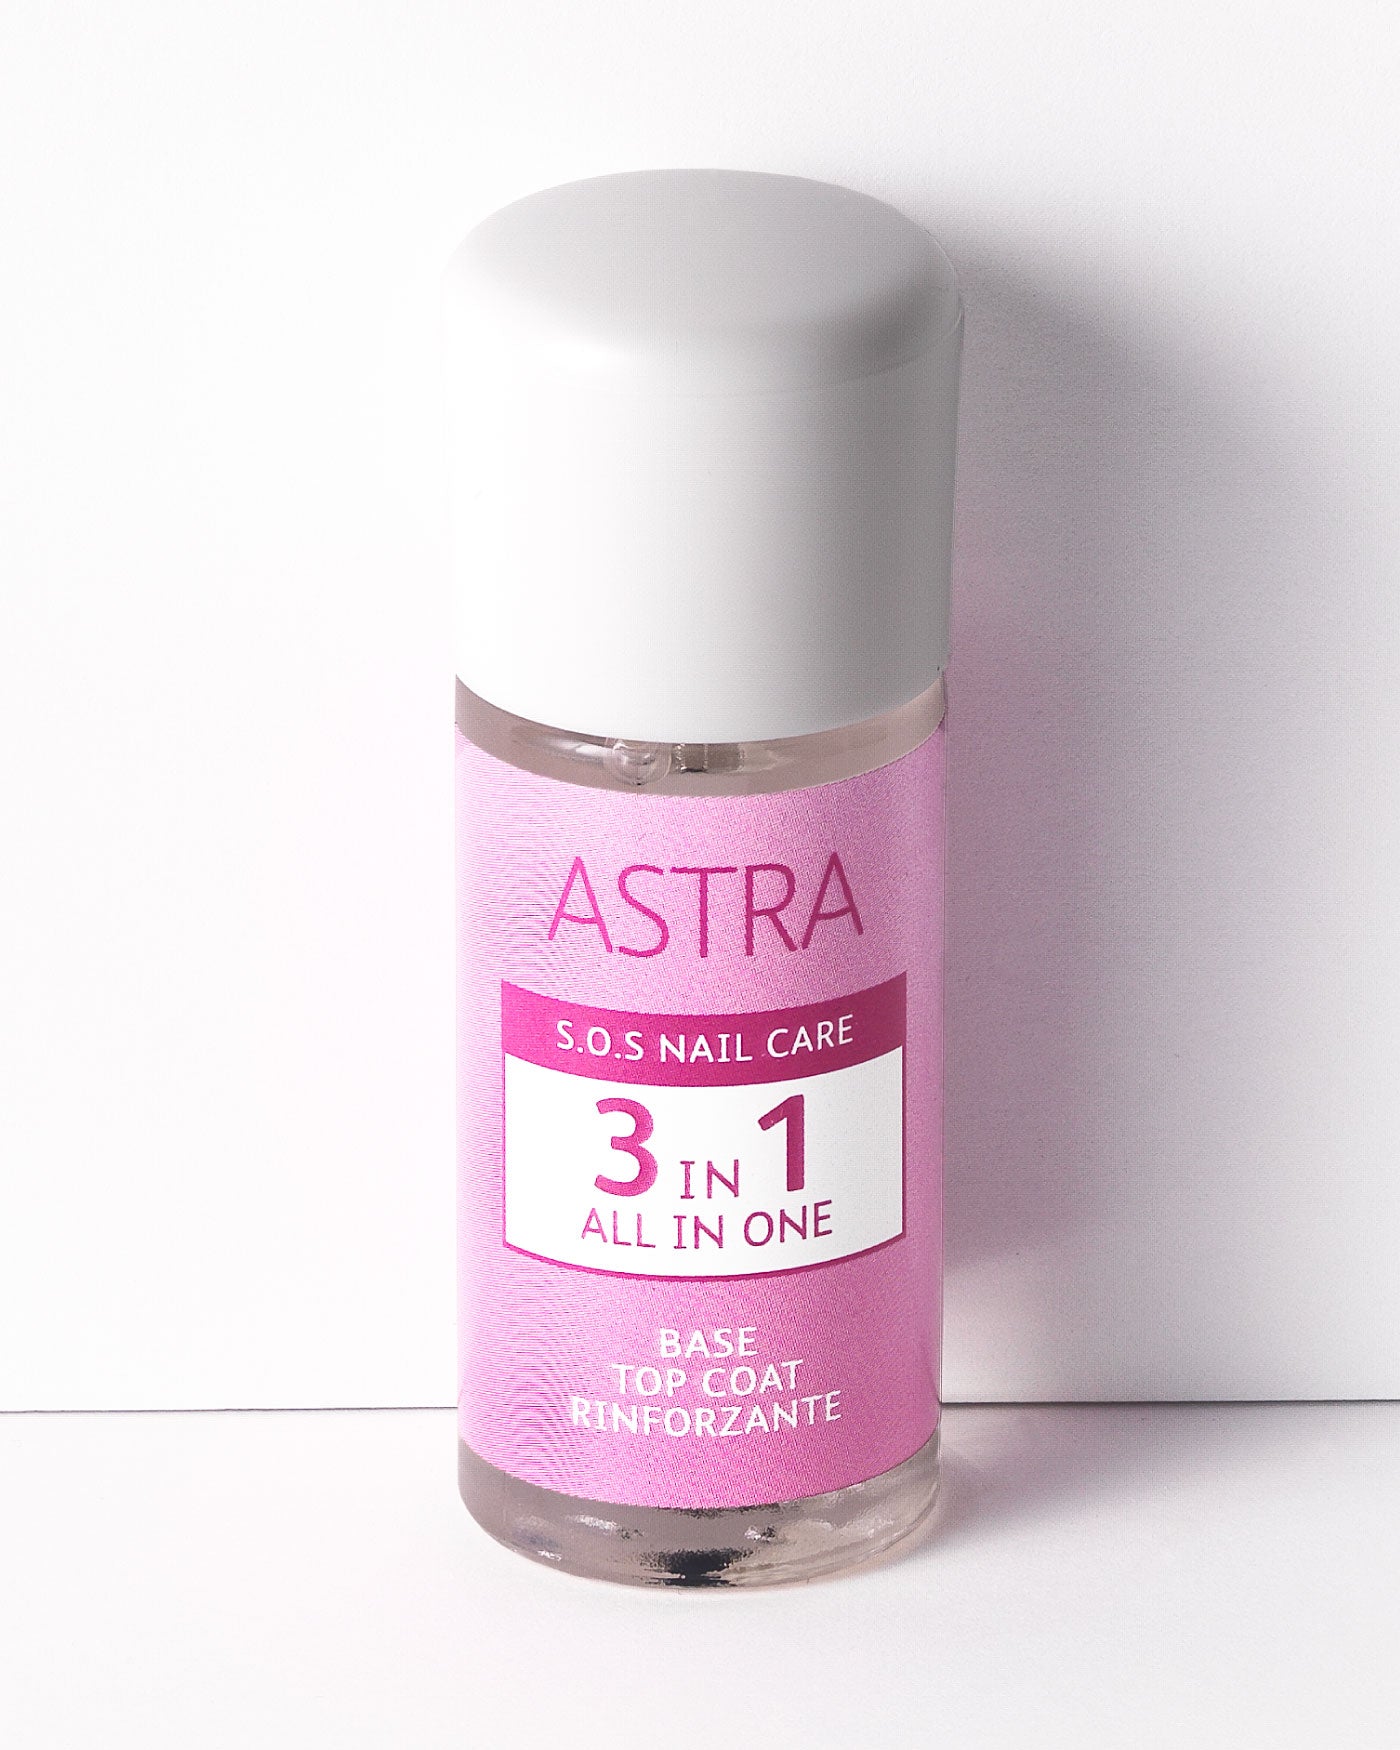 S.O.S NAIL CARE - 3 IN 1 ALL IN ONE - Nails - Astra Make-Up